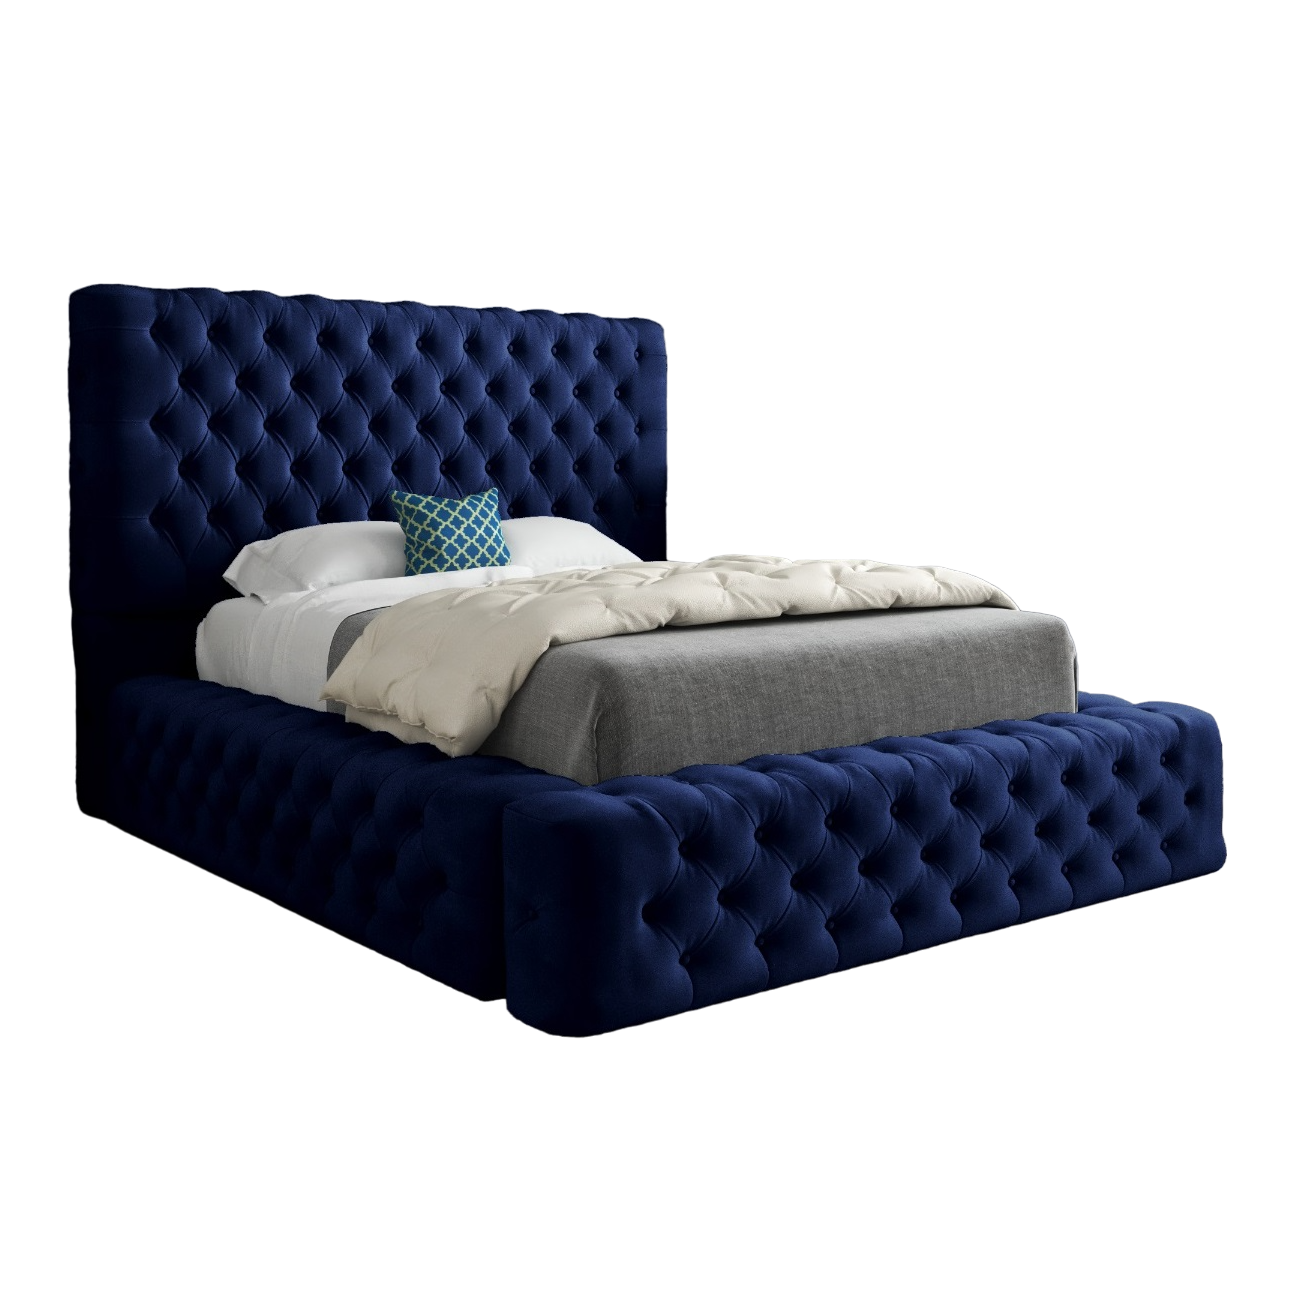 Grand Milan Pleated Upholstery Bed Frame